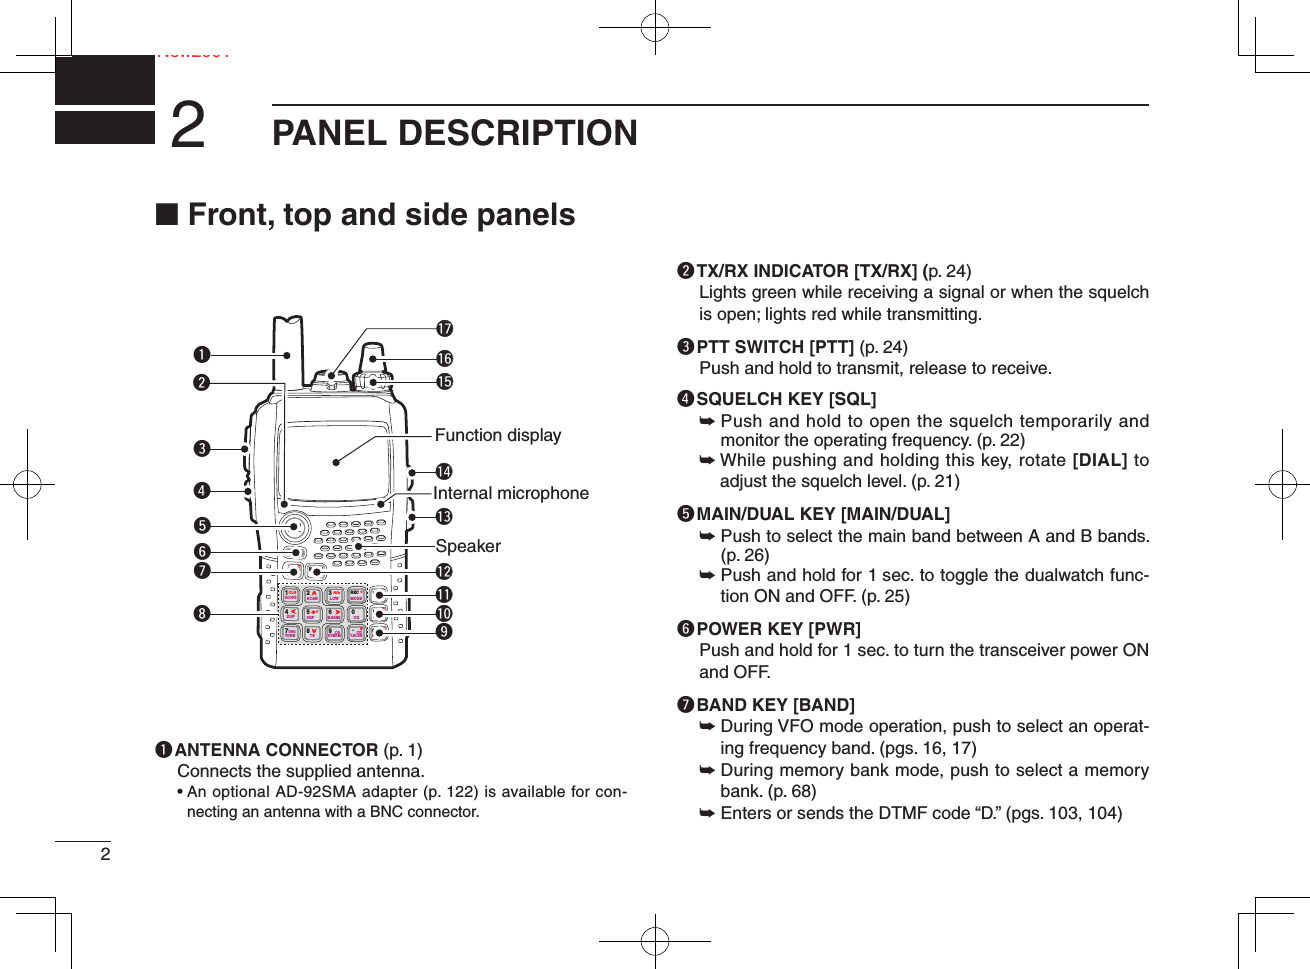 2NeNew2001PANEL DESCRIPTION2■ Front, top and side panelsq ANTENNA CONNECTOR (p. 1)Connects the supplied antenna.•  An optional AD-92SMA adapter (p. 122) is available for con-necting an antenna with a BNC connector.w TX/RX INDICATOR [TX/RX] (p. 24)Lights green while receiving a signal or when the squelch is open; lights red while transmitting.e PTT SWITCH [PTT] (p. 24)Push and hold to transmit, release to receive.r SQUELCH KEY [SQL]➥  Push and hold to open the squelch temporarily and monitor the operating frequency. (p. 22)➥  While pushing and holding this key, rotate [DIAL] to adjust the squelch level. (p. 21)t MAIN/DUAL KEY [MAIN/DUAL]➥  Push to select the main band between A and B bands. (p. 26)➥  Push and hold for 1 sec. to toggle the dualwatch func-tion ON and OFF. (p. 25)y POWER KEY [PWR]Push and hold for 1 sec. to turn the transceiver power ON and OFF. u BAND KEY [BAND]➥  During VFO mode operation, push to select an operat-ing frequency band. (pgs. 16, 17)➥  During memory bank mode, push to select a memory bank. (p. 68)➥ Enters or sends the DTMF code “D.” (pgs. 103, 104)MAINBANDRECMENUVFOMRCALL123456789 .0DUALSCOPESCANLOW MODE MHzS.MWRX  CSCQM.NAMESKIPDUPTONE TSDTMF.MT.SCANDSQCS CD#CBACLRA/aDPWRqSpeakeruFunction displayInternal microphoneiytrew!3!4!0o!1!2!5!6!7